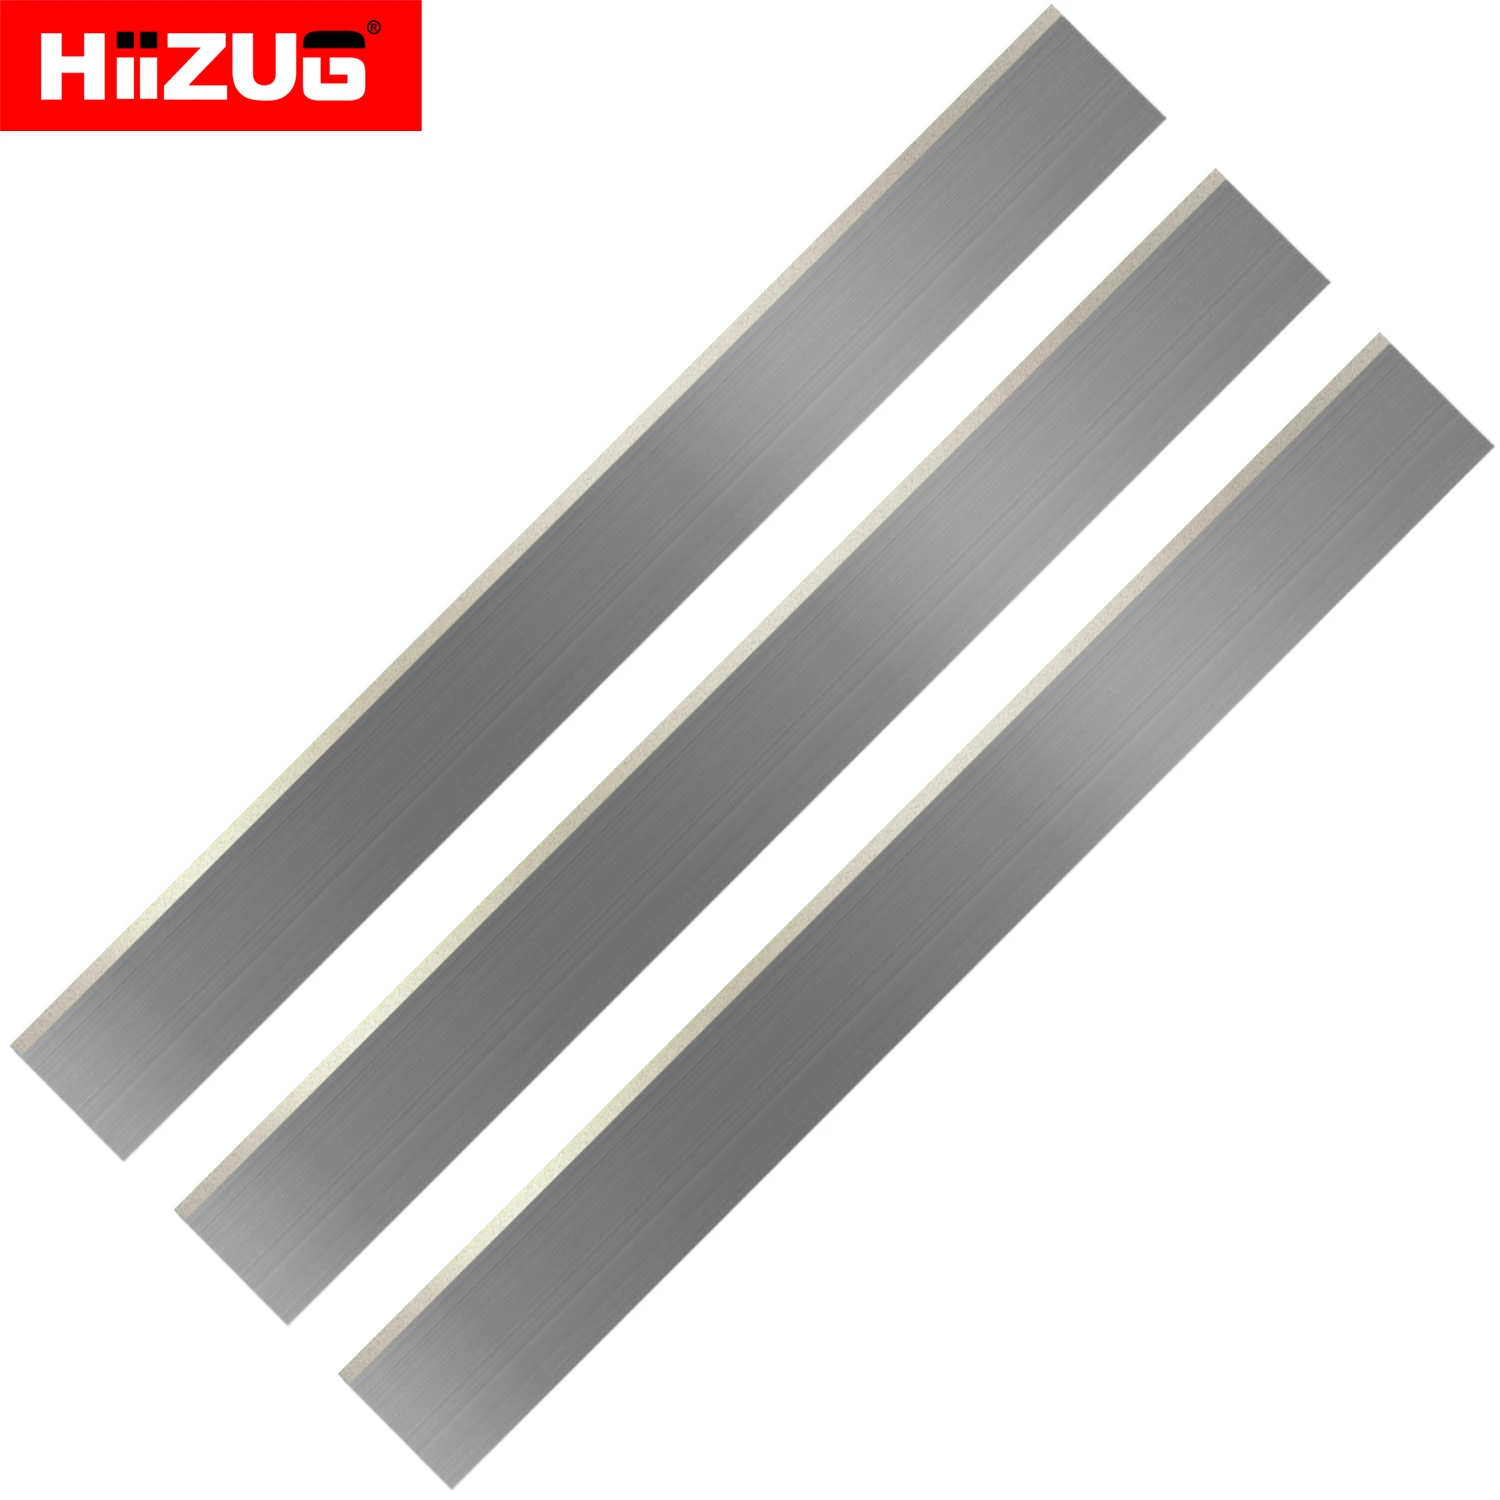 Planer Blades Knives 320mm×35mm×3mm for Planer Jointer Thicknesser Surface Cutter Head Machines Set of 3 Pieces